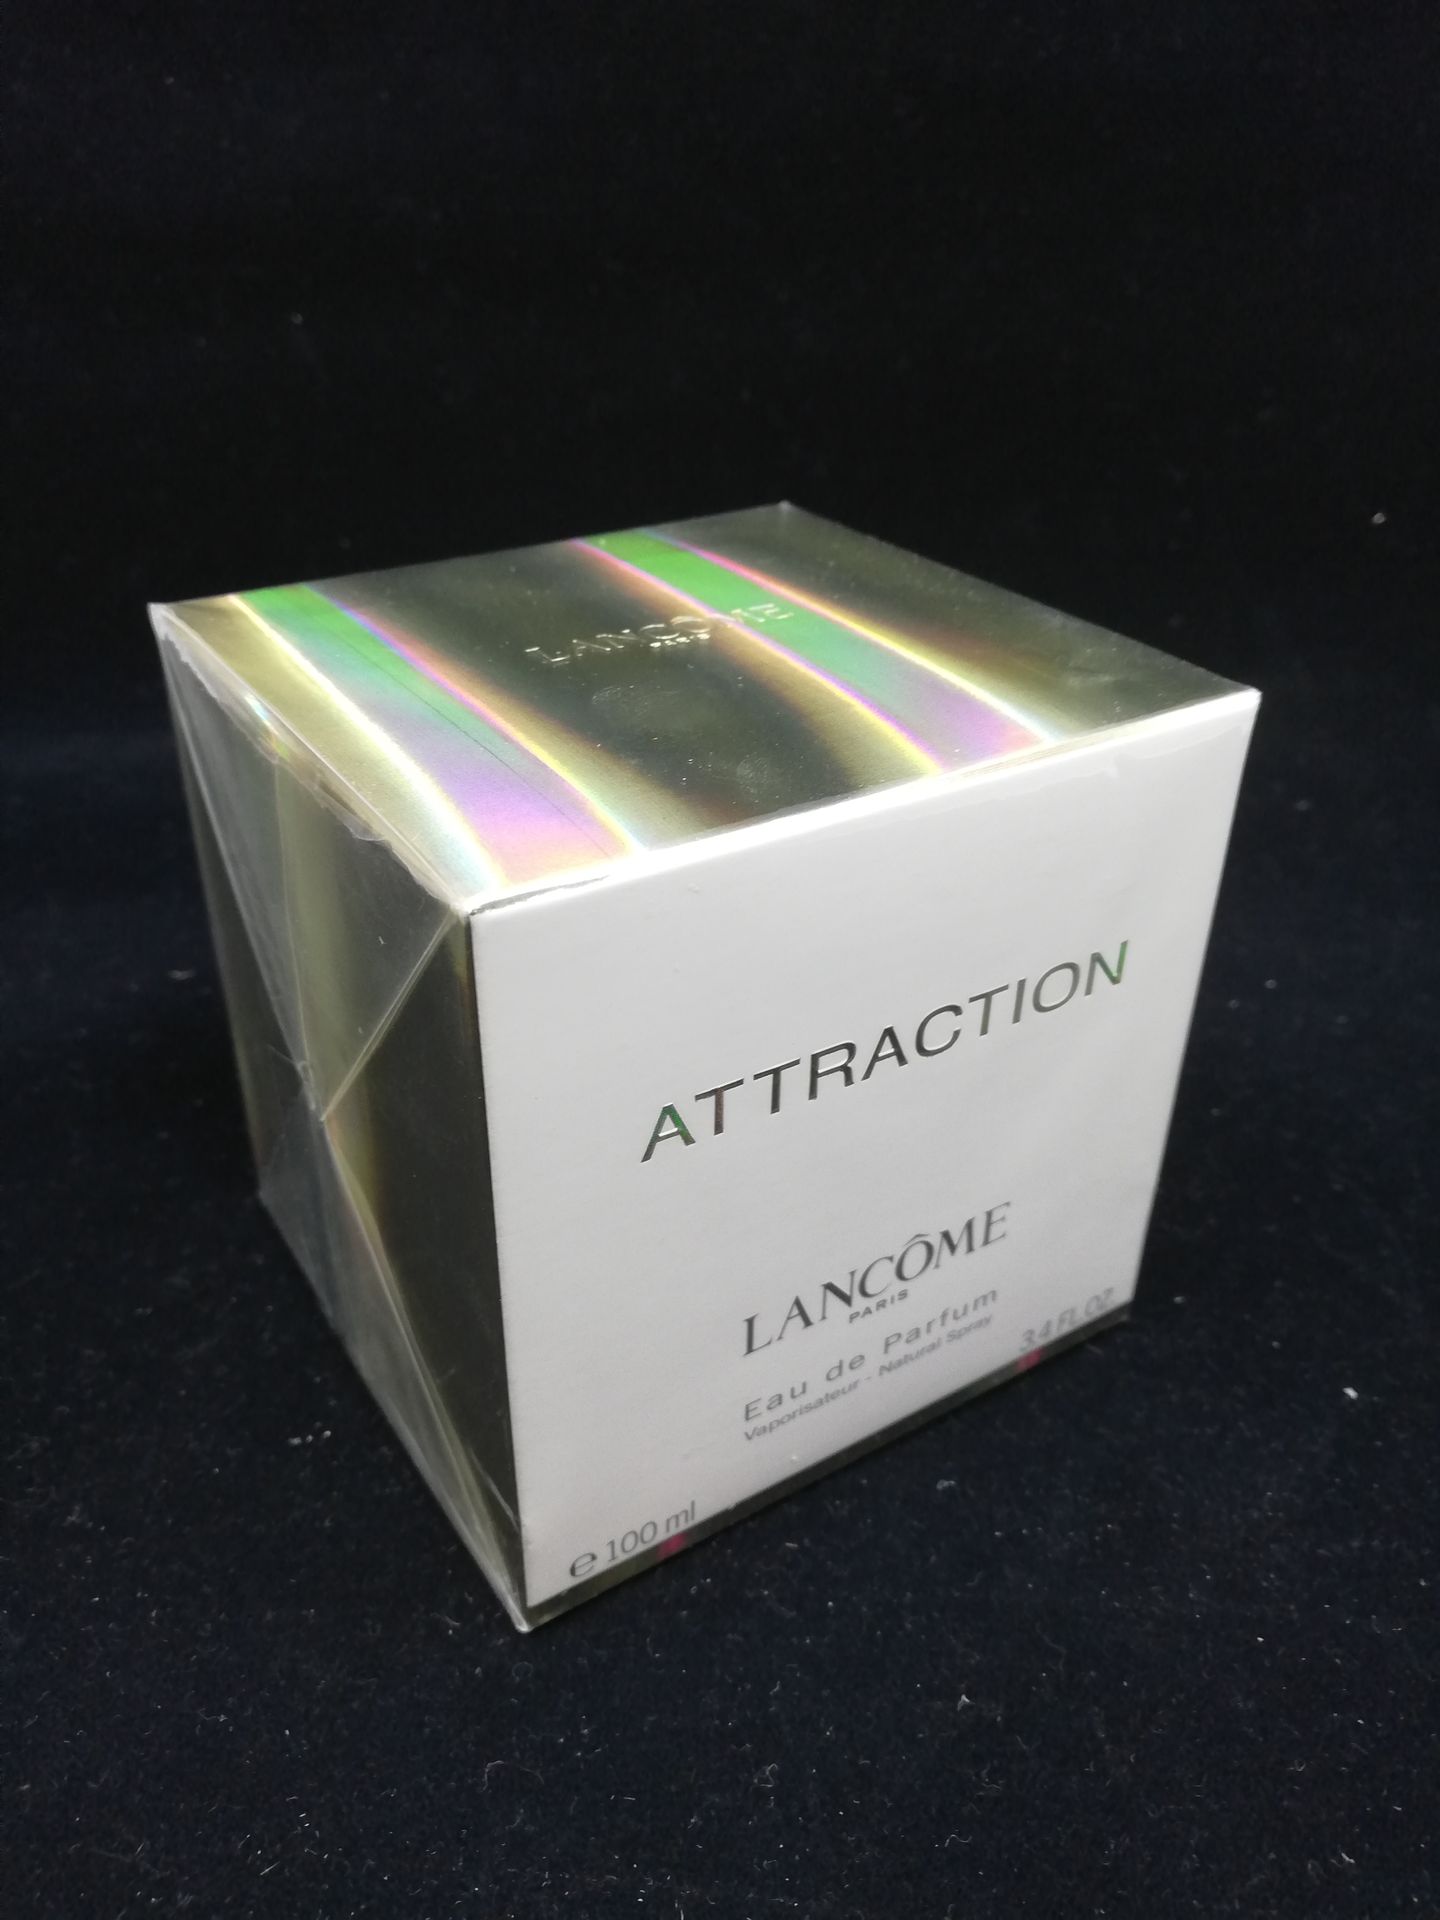 Null Lancôme - "Attraction" - (2003)

Presented in its cellophane-titled cardboa&hellip;